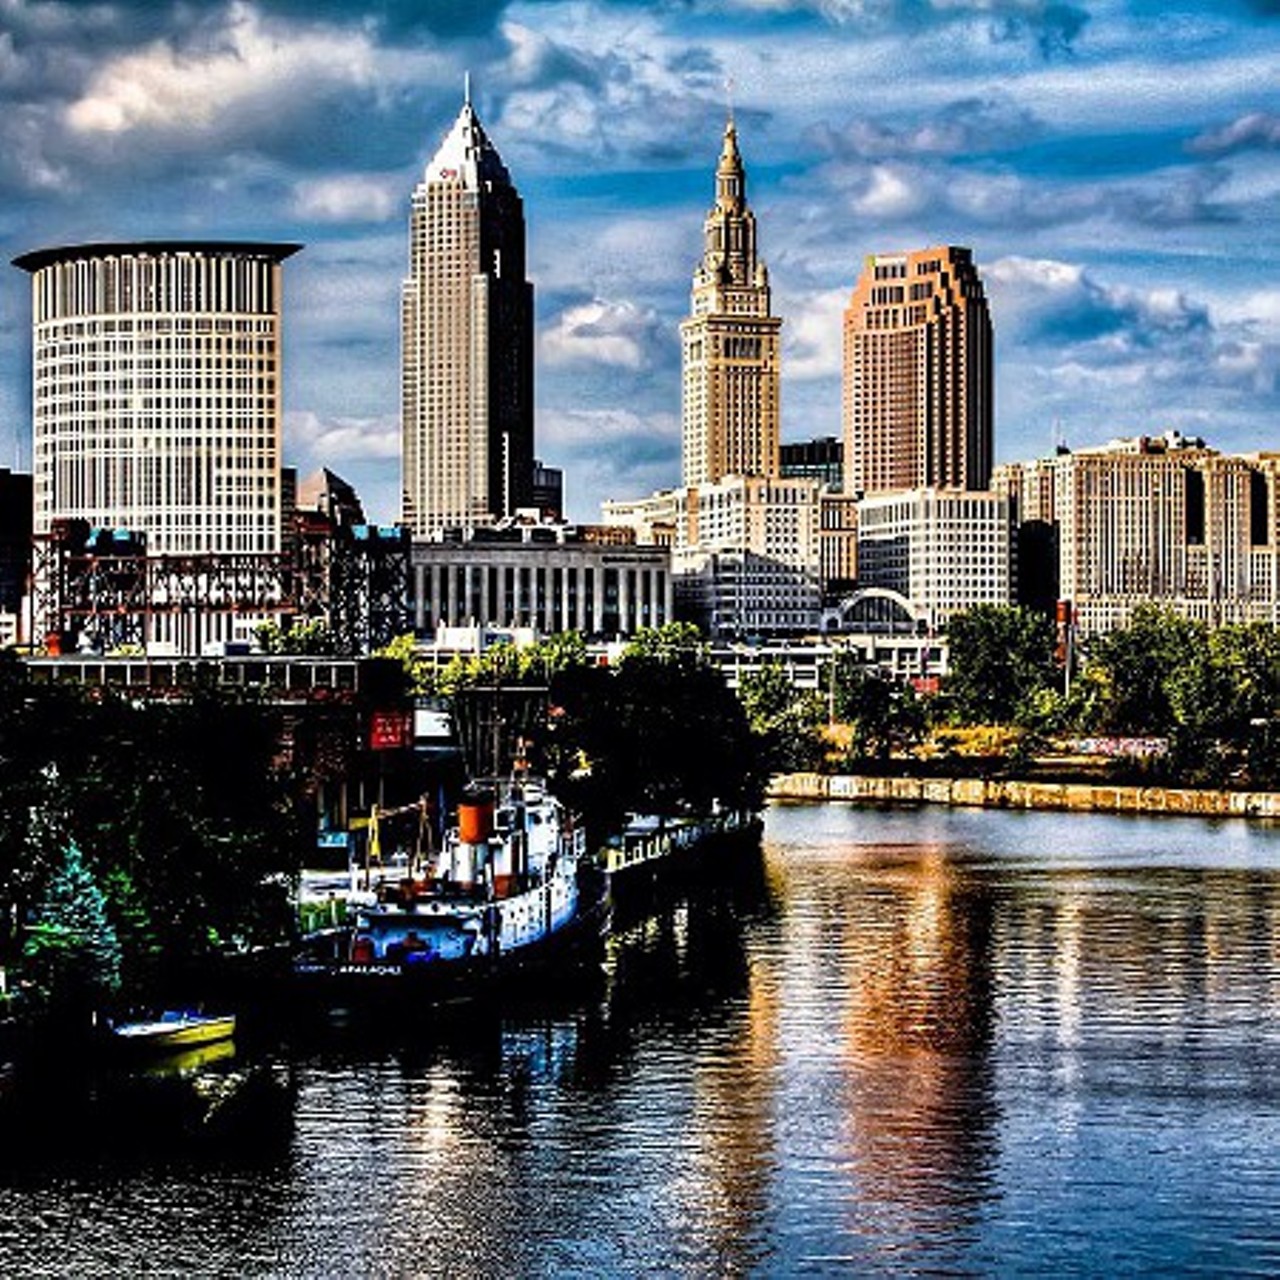 13 of Our Favorite Cleveland Photos from 2013